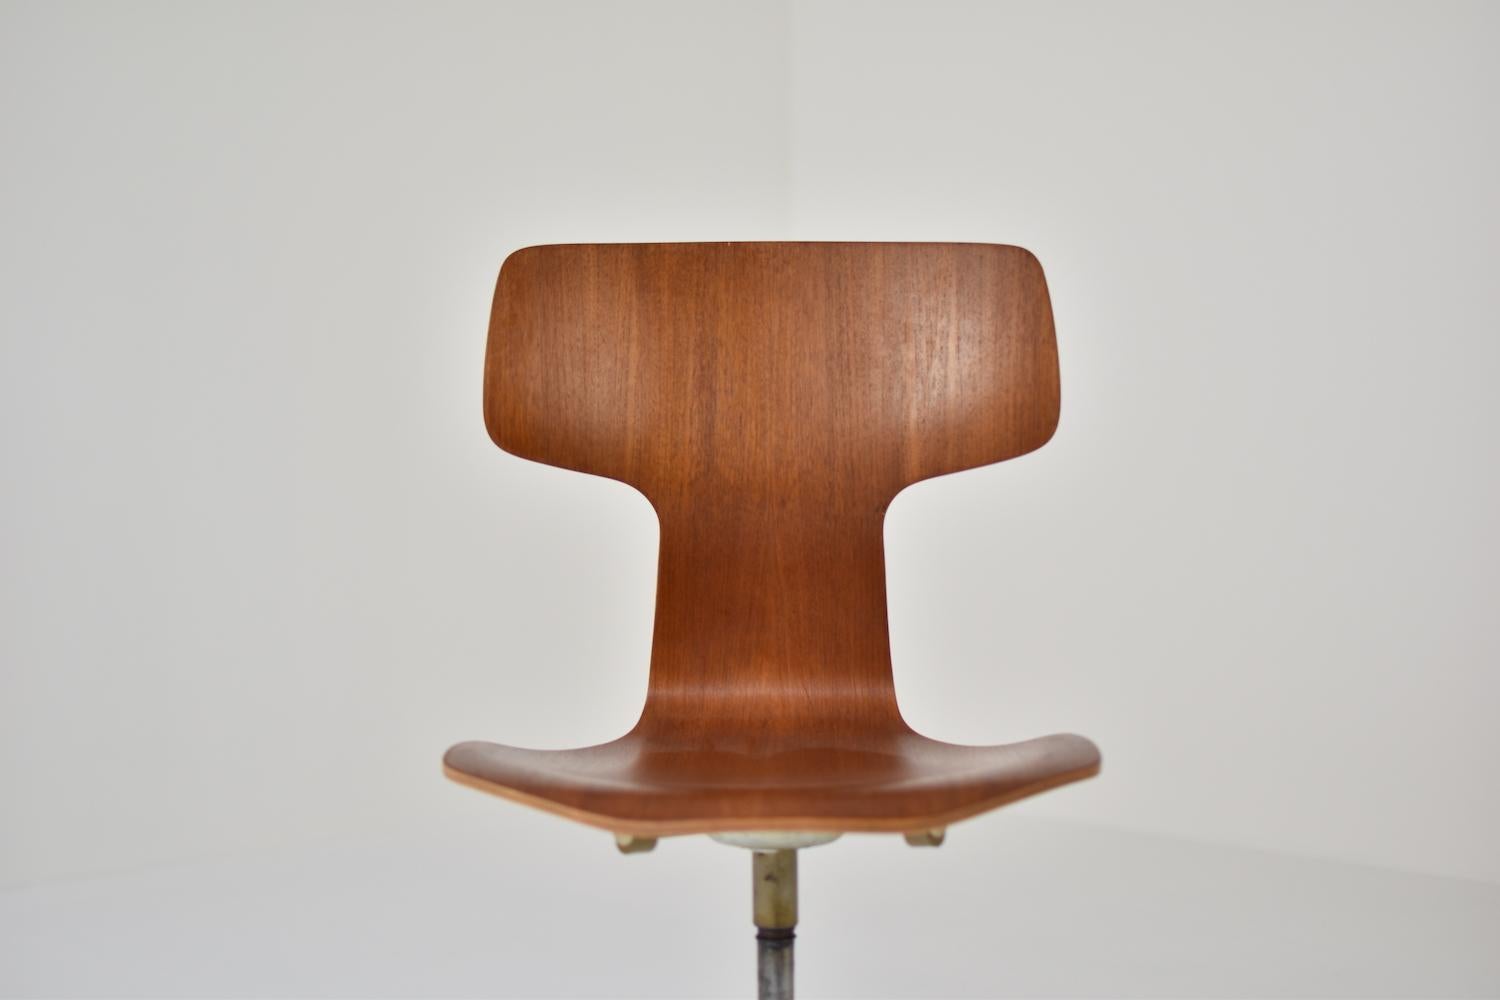 Lovely ‘3103’ desk chair designed by Arne Jacobsen for Fritz Hansen, Denmark, 1950s. This iconic Hammer chair has a base made out of a chrome tubular steel construction with a seat made of teak. Adjustable in height and in extremely good condition.